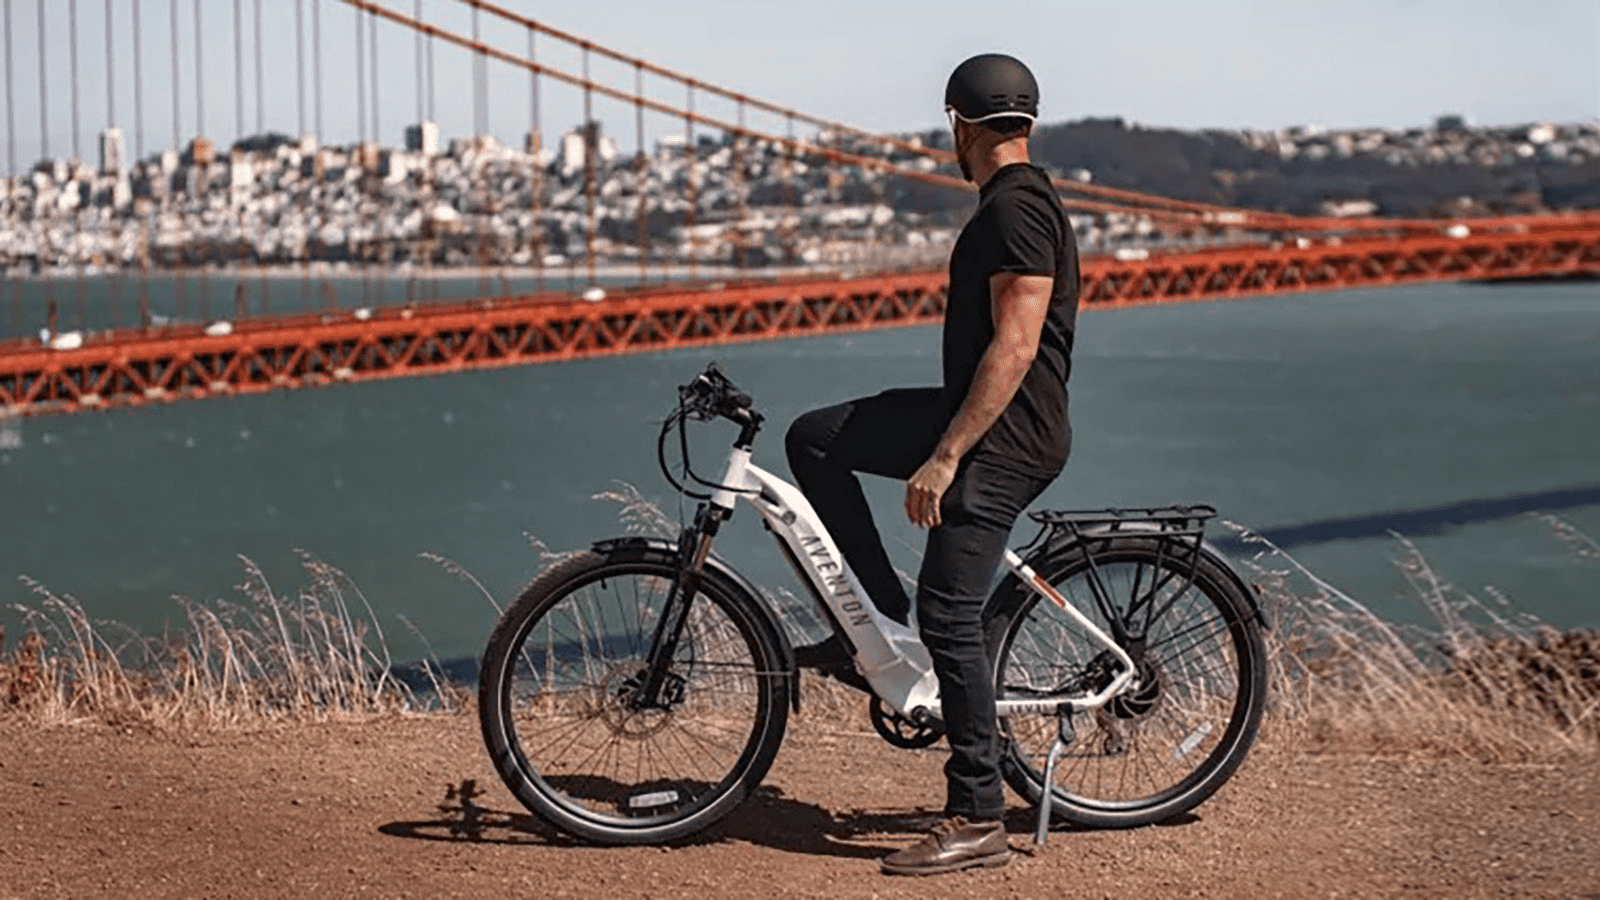 Aventon Introduces The New Level.2 Ebike Engineered with a torque sensor, a revolutionary first for Aventon